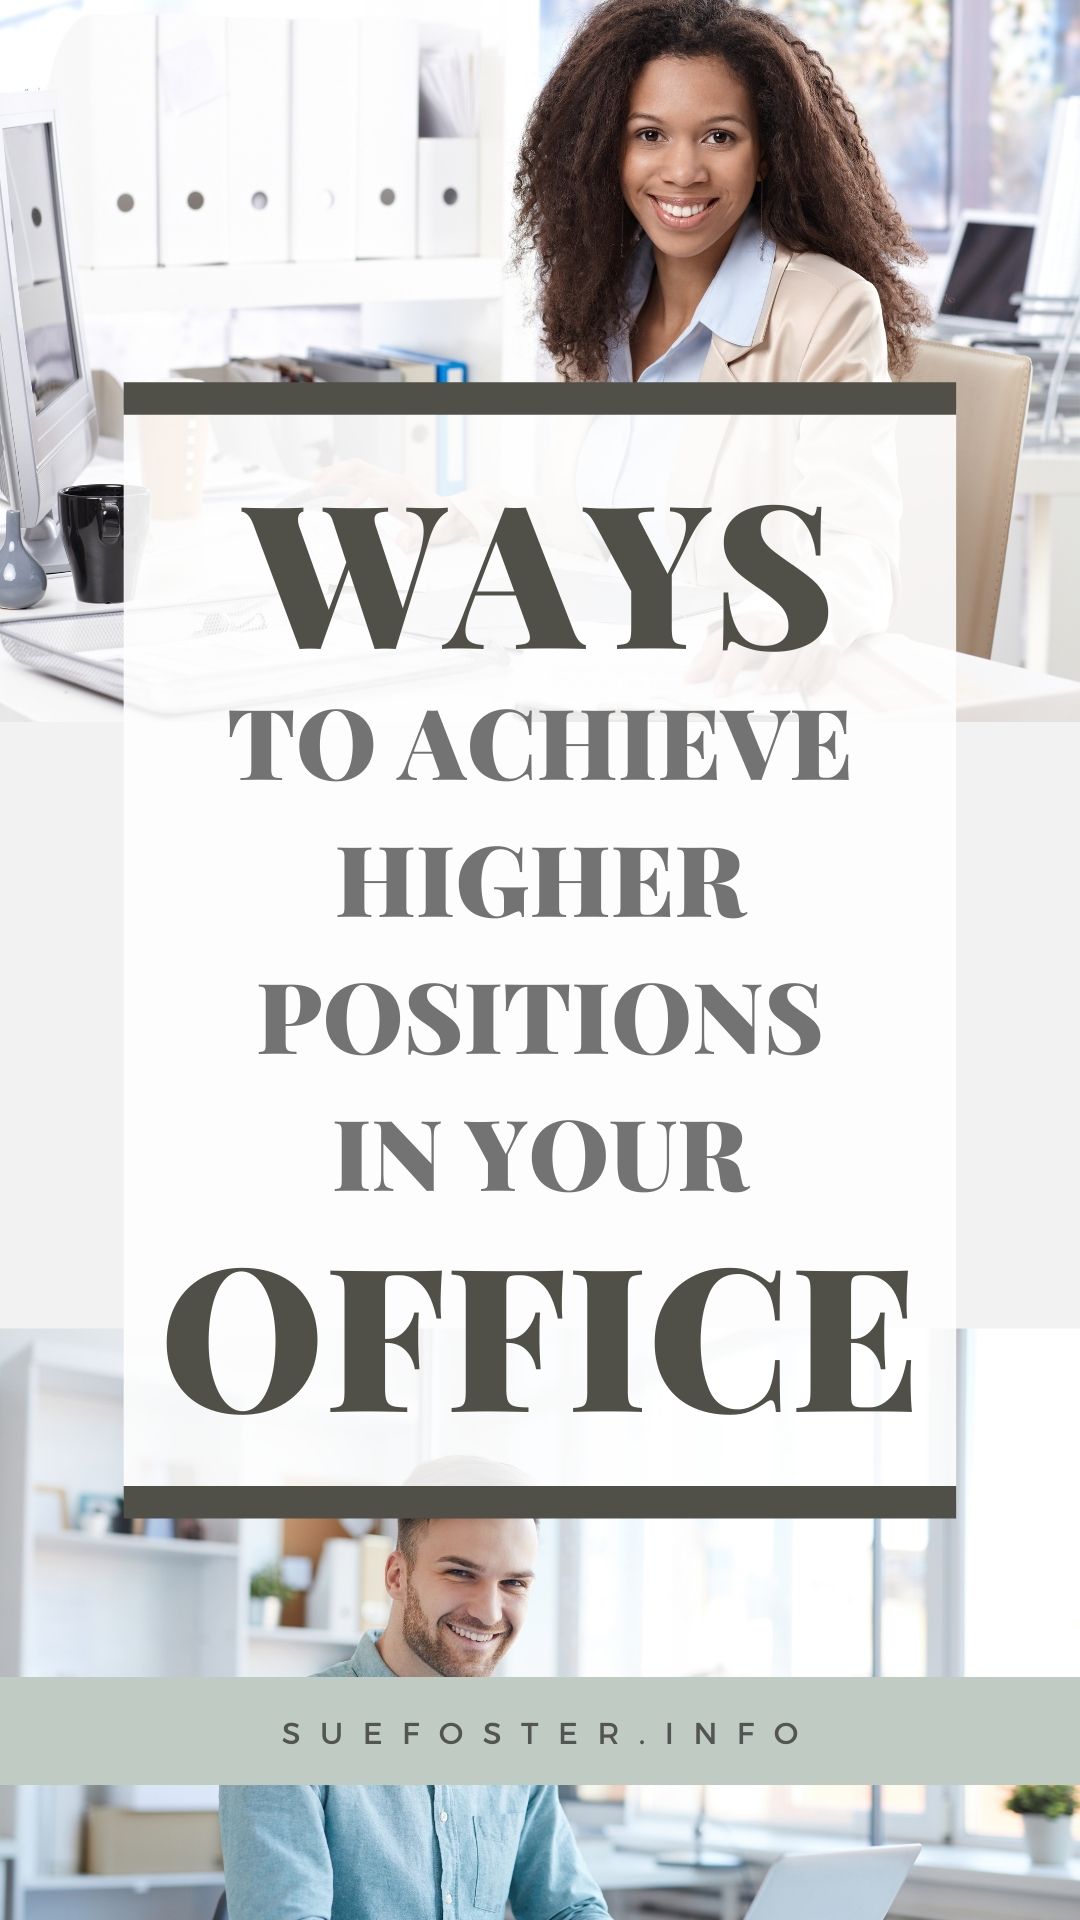 Every office has a hierarchy where one employee works under the other. Here's how you can make your way to higher positions.